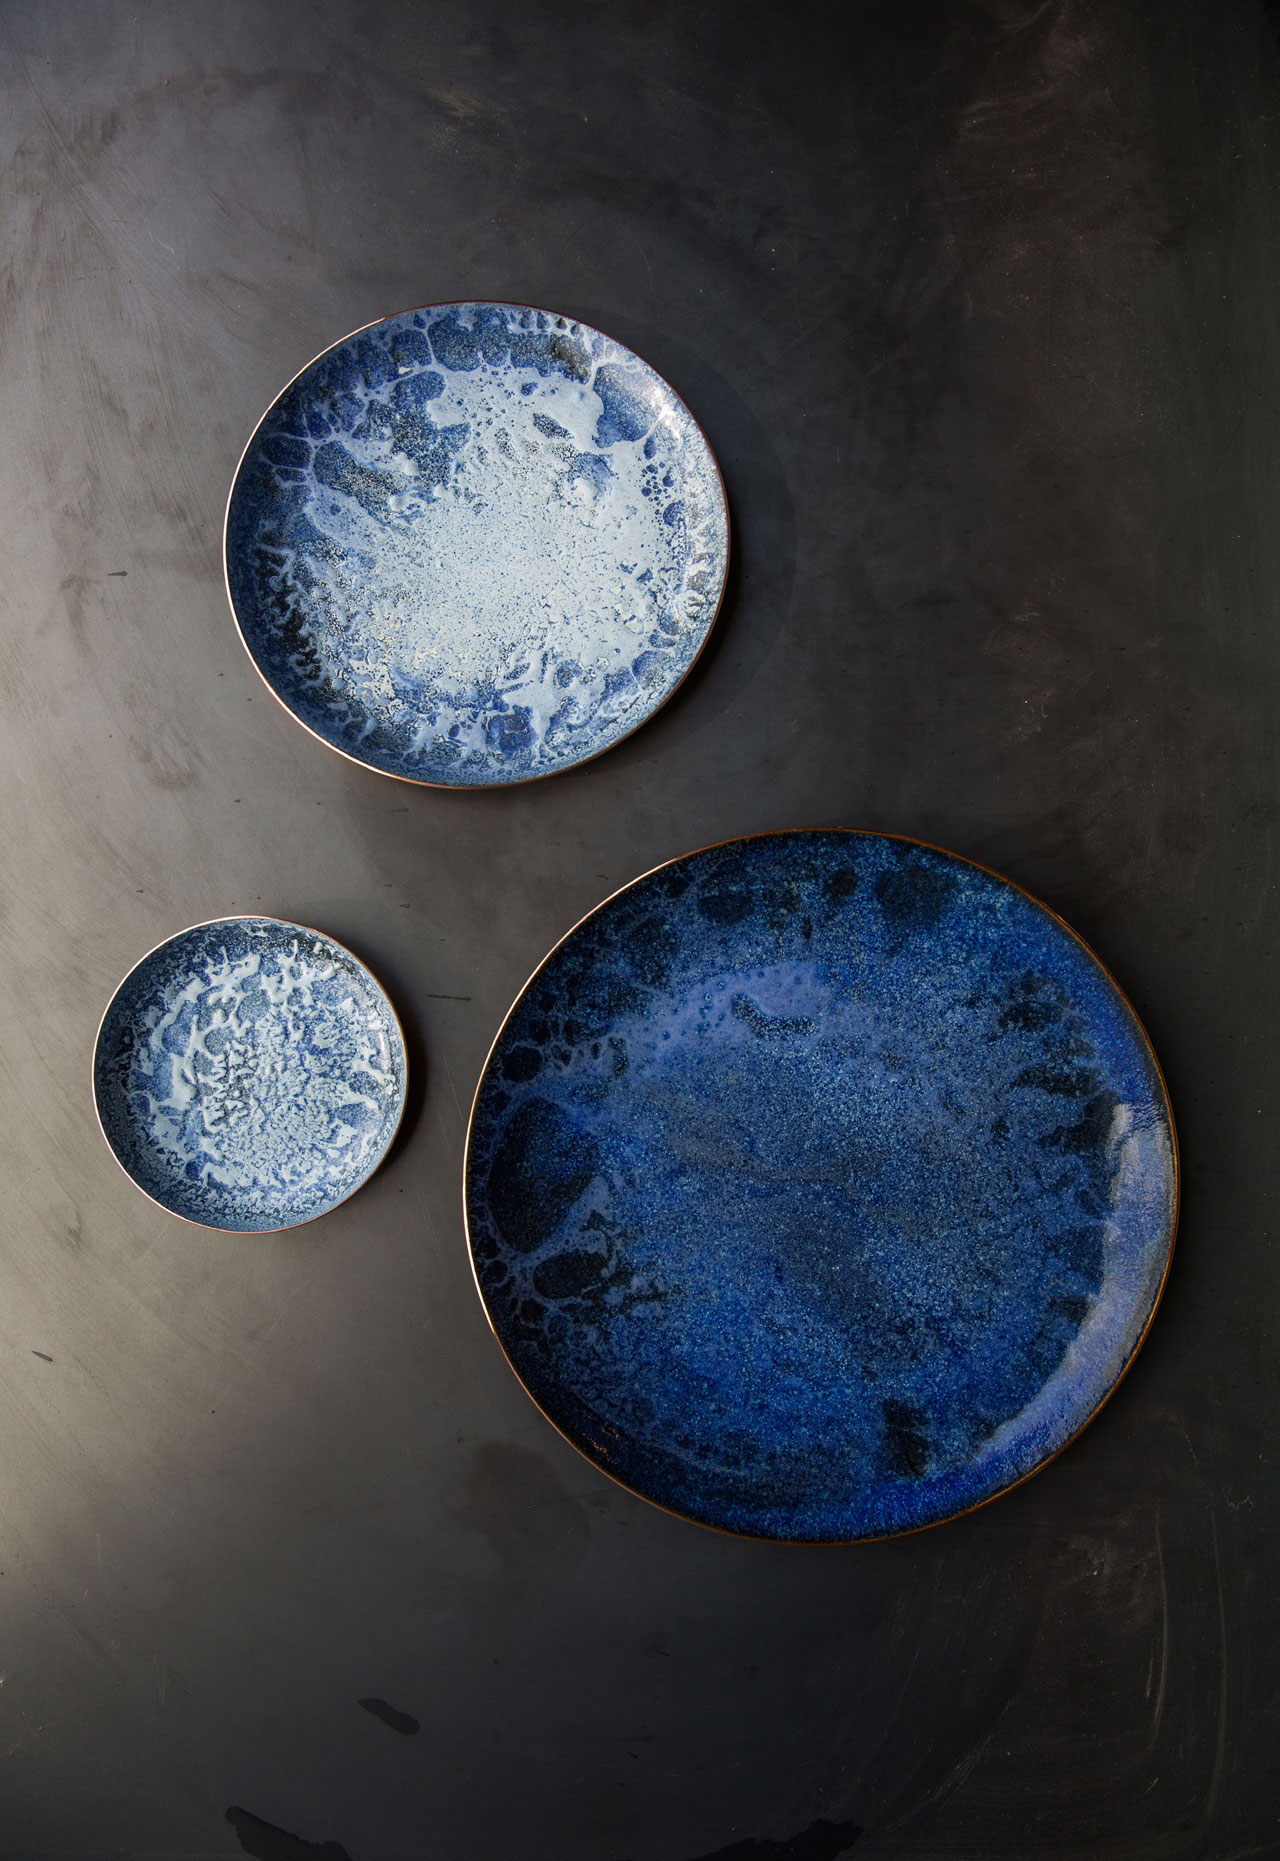 Ancient age tableware series by Haäm (Yun-Jin Kim and Jungmo Kwon).